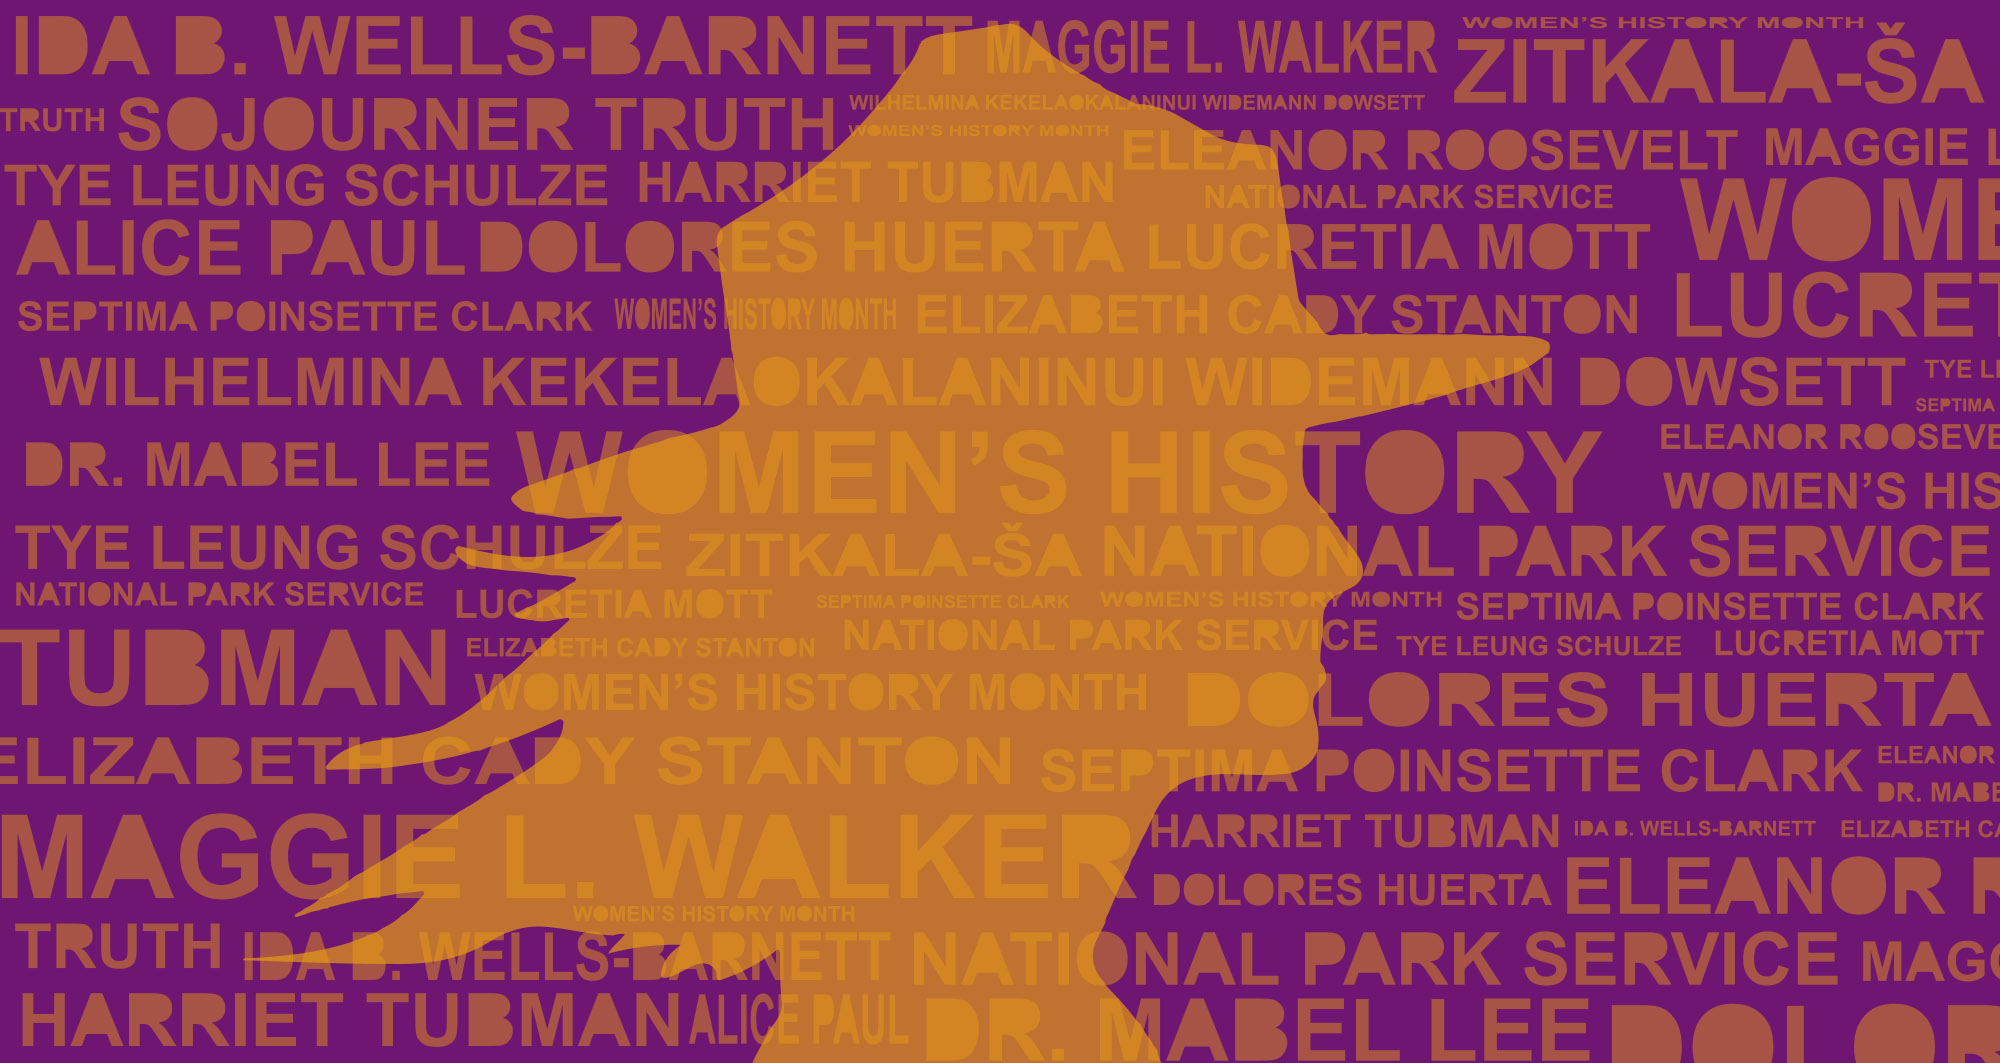 Women's History Month - NPS Commemorations and Celebrations (. National  Park Service)